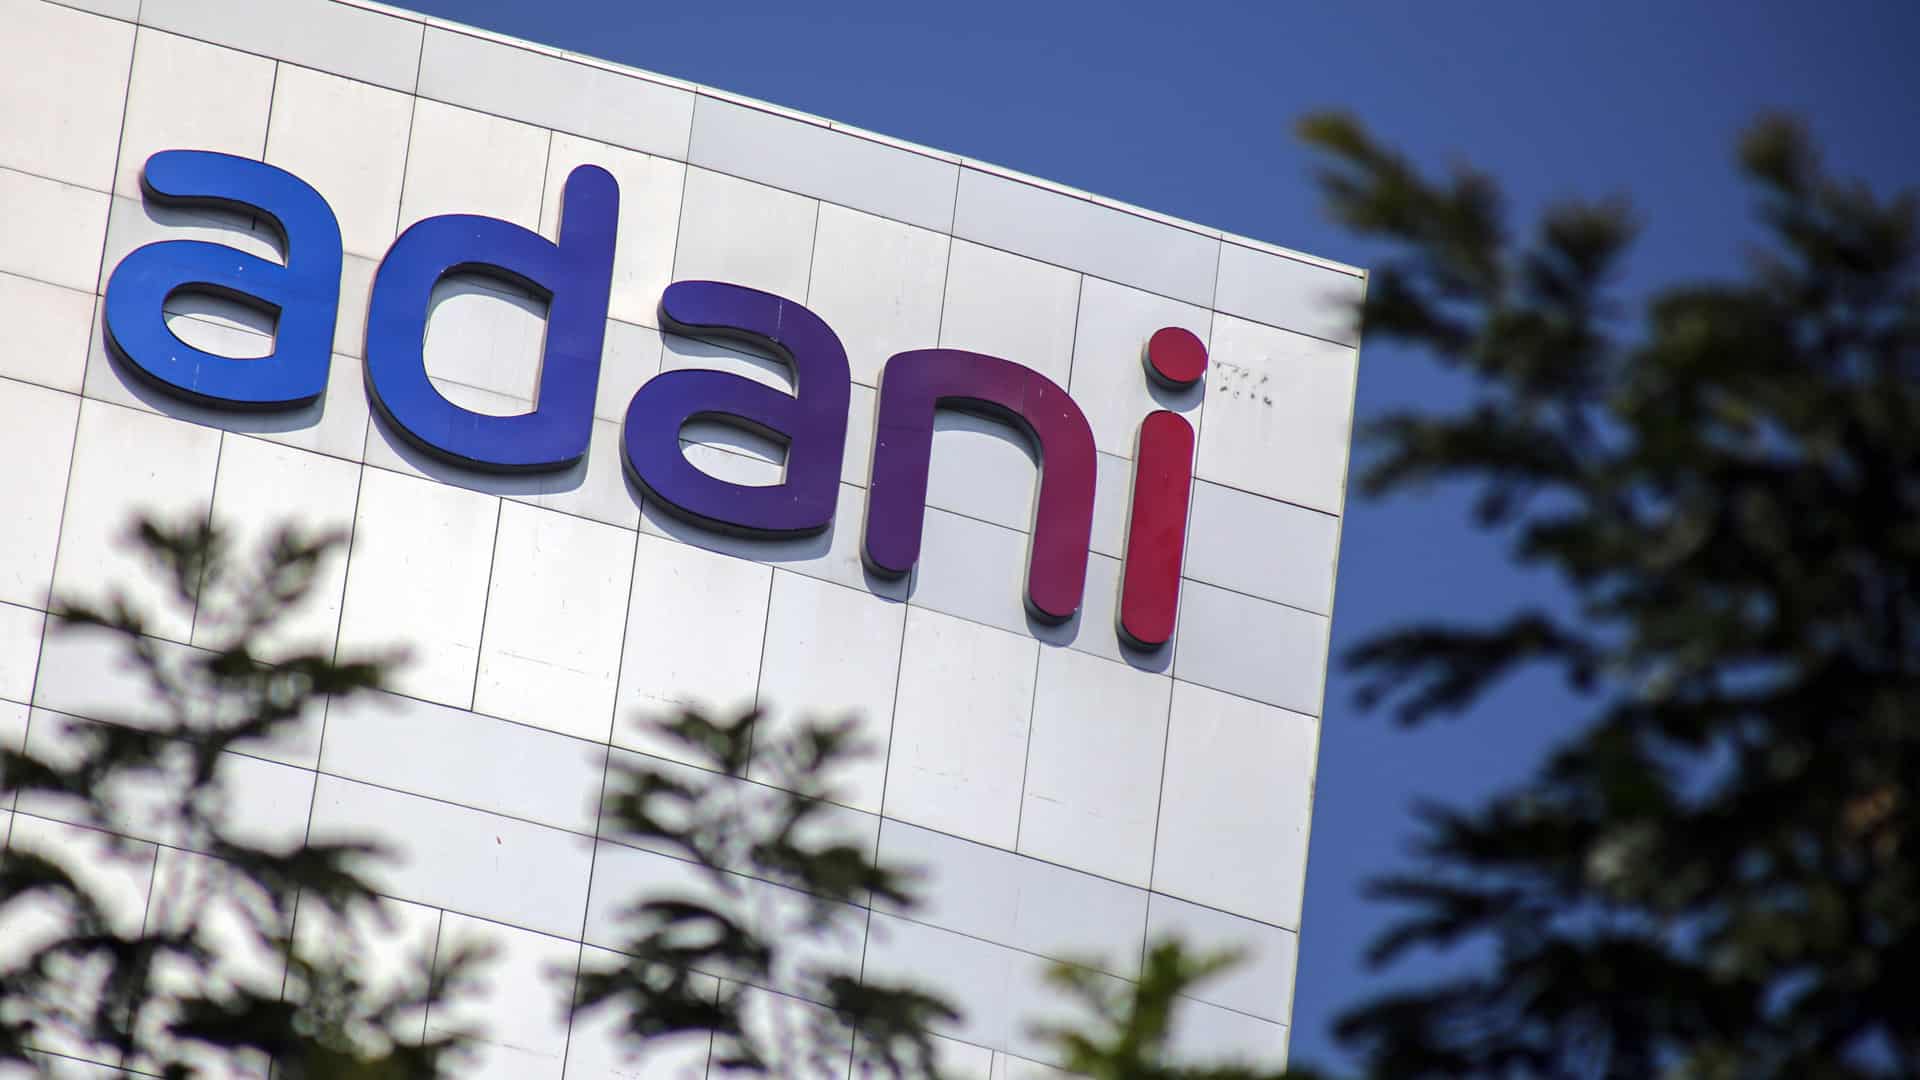 Adani Group to pre-pay USD 1,114 million for release of pledged shares ahead of maturity in Sep'24